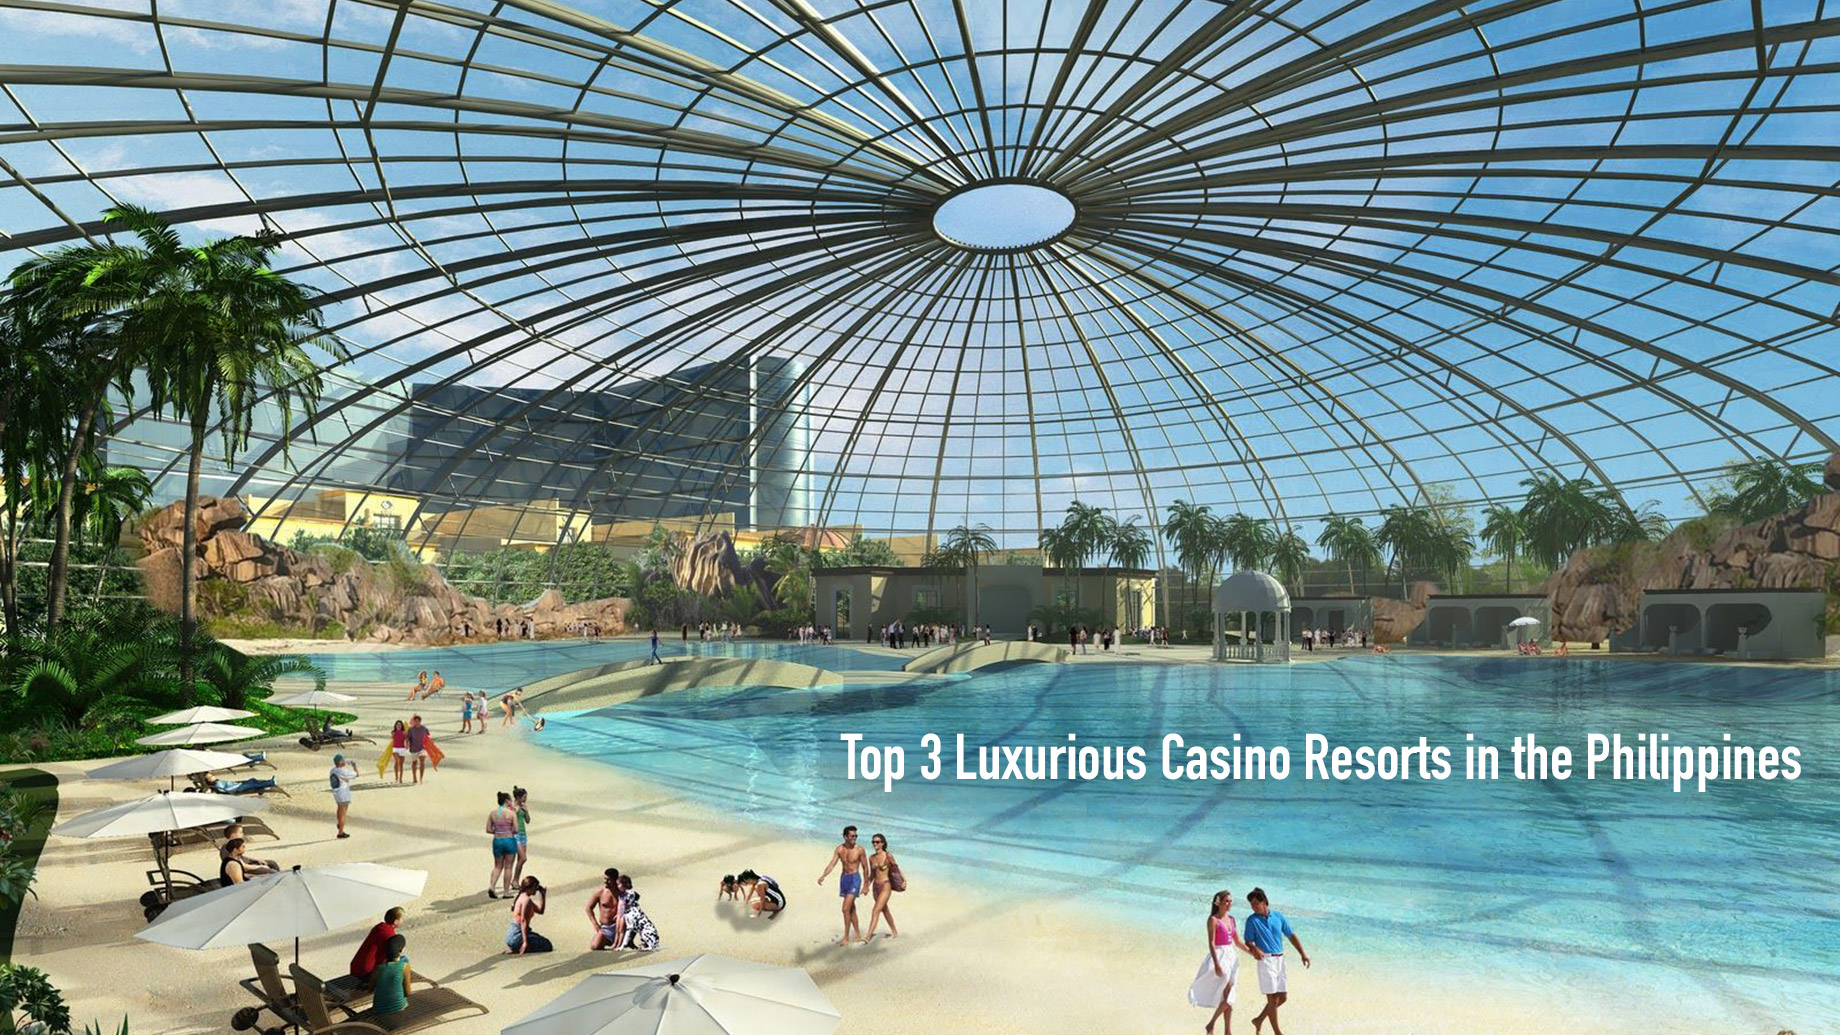 Top 3 Luxurious Casino Resorts You Have to Experience in the Philippines